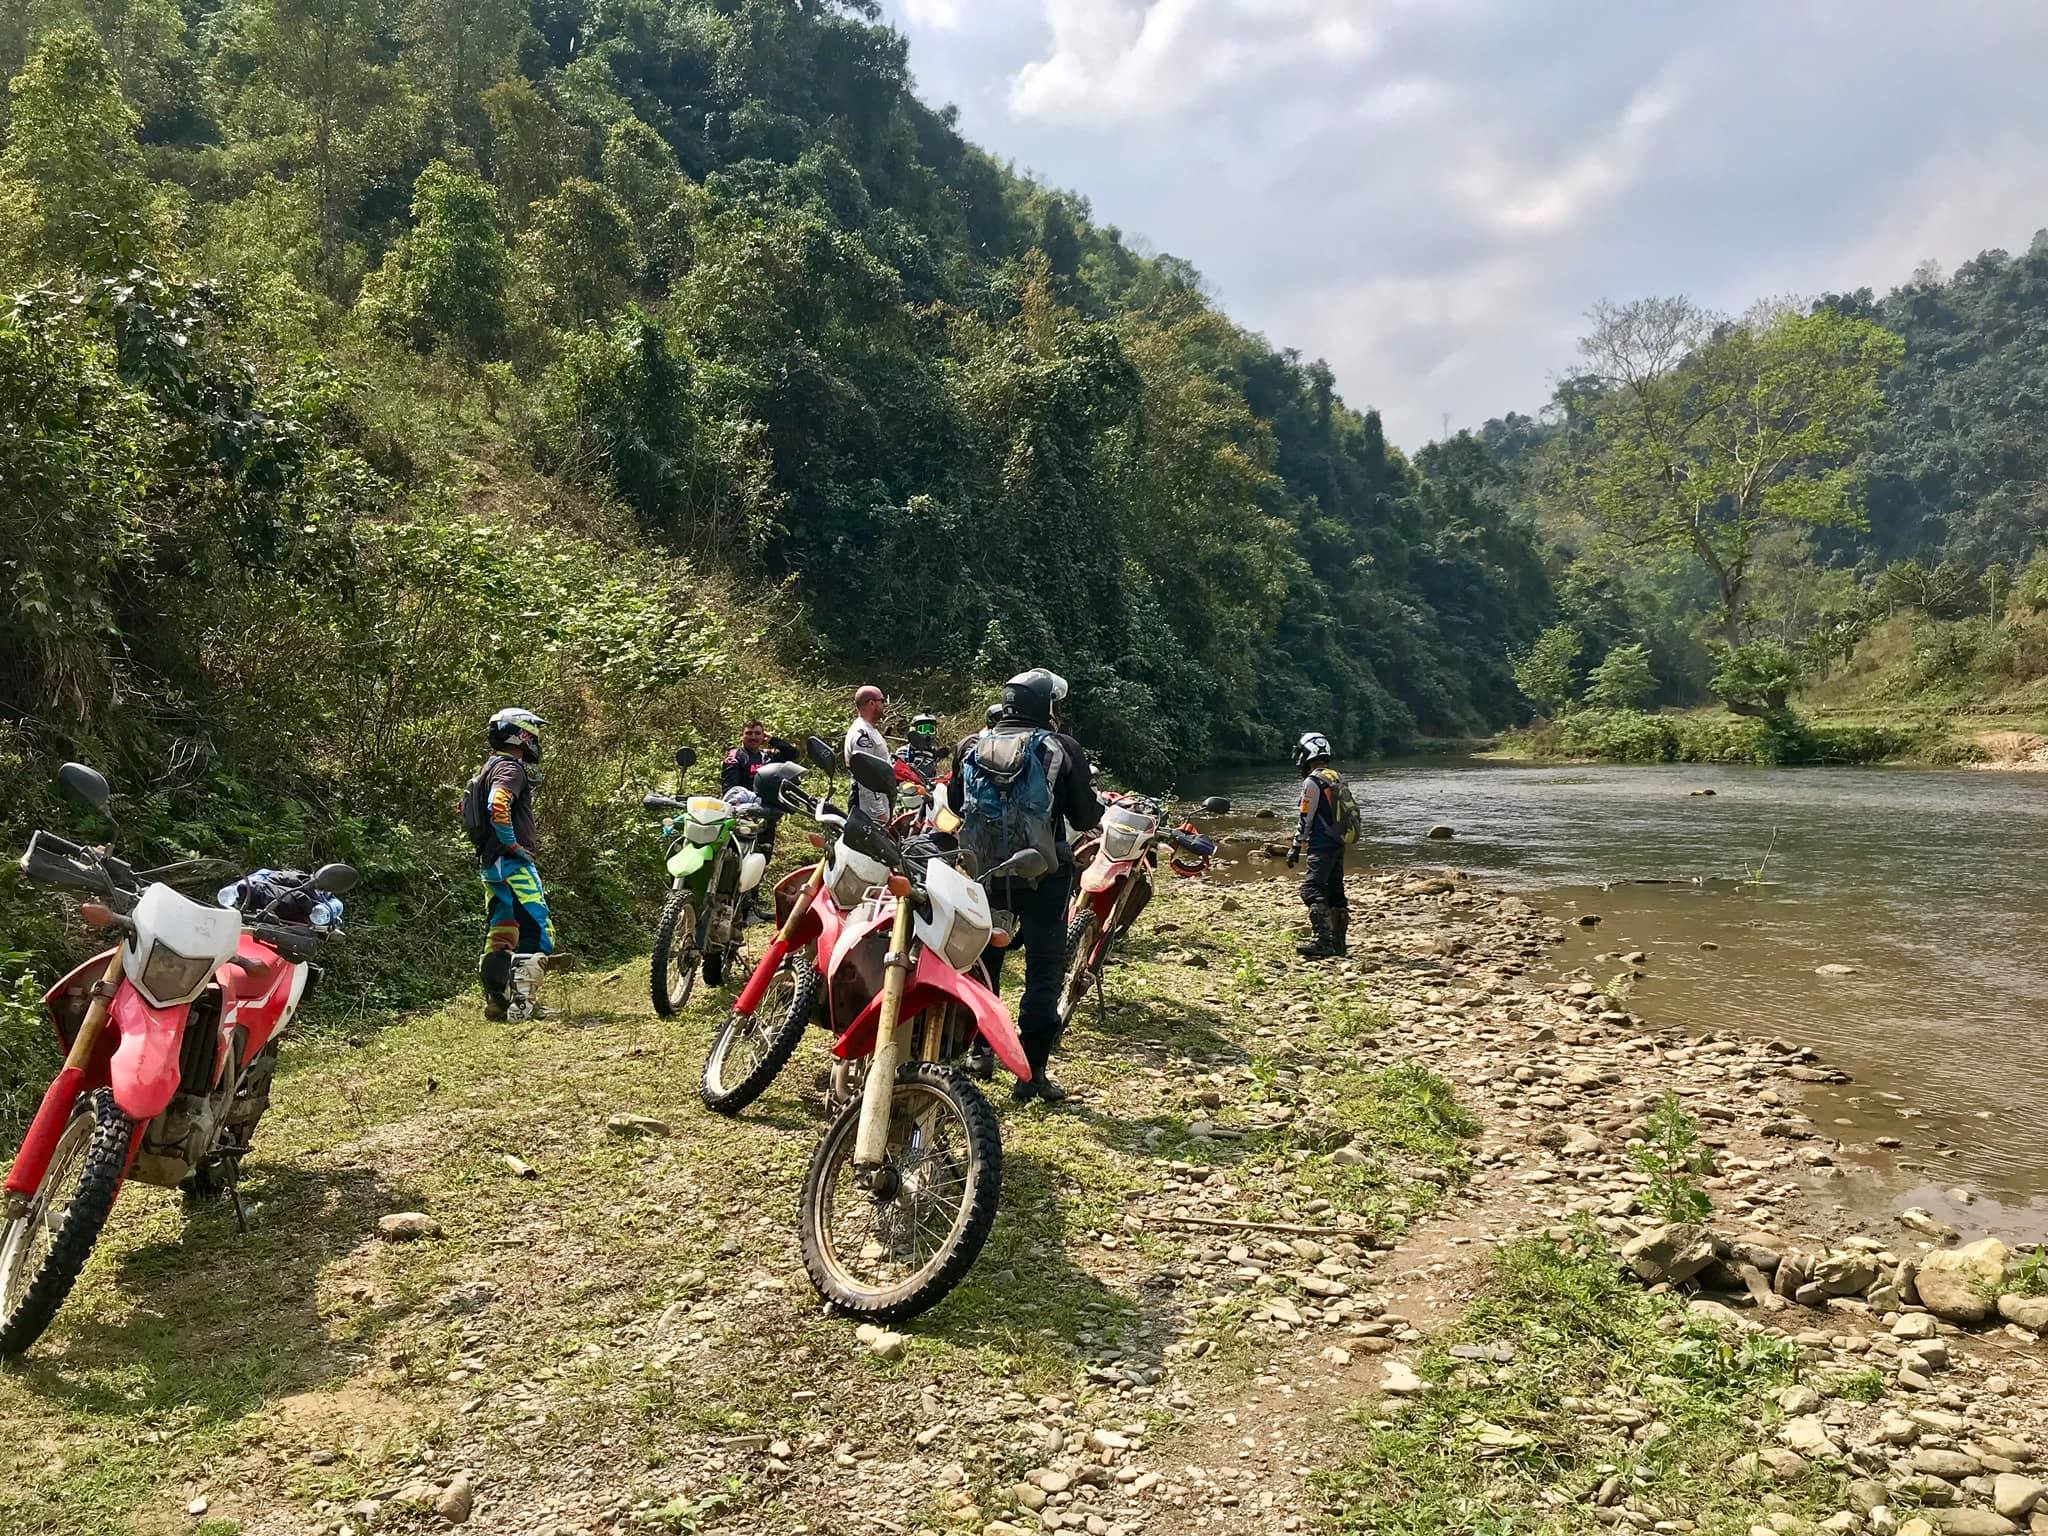 Indochina Motorbike Tour from Vietnam to Laos and Cambodia for 20 Days